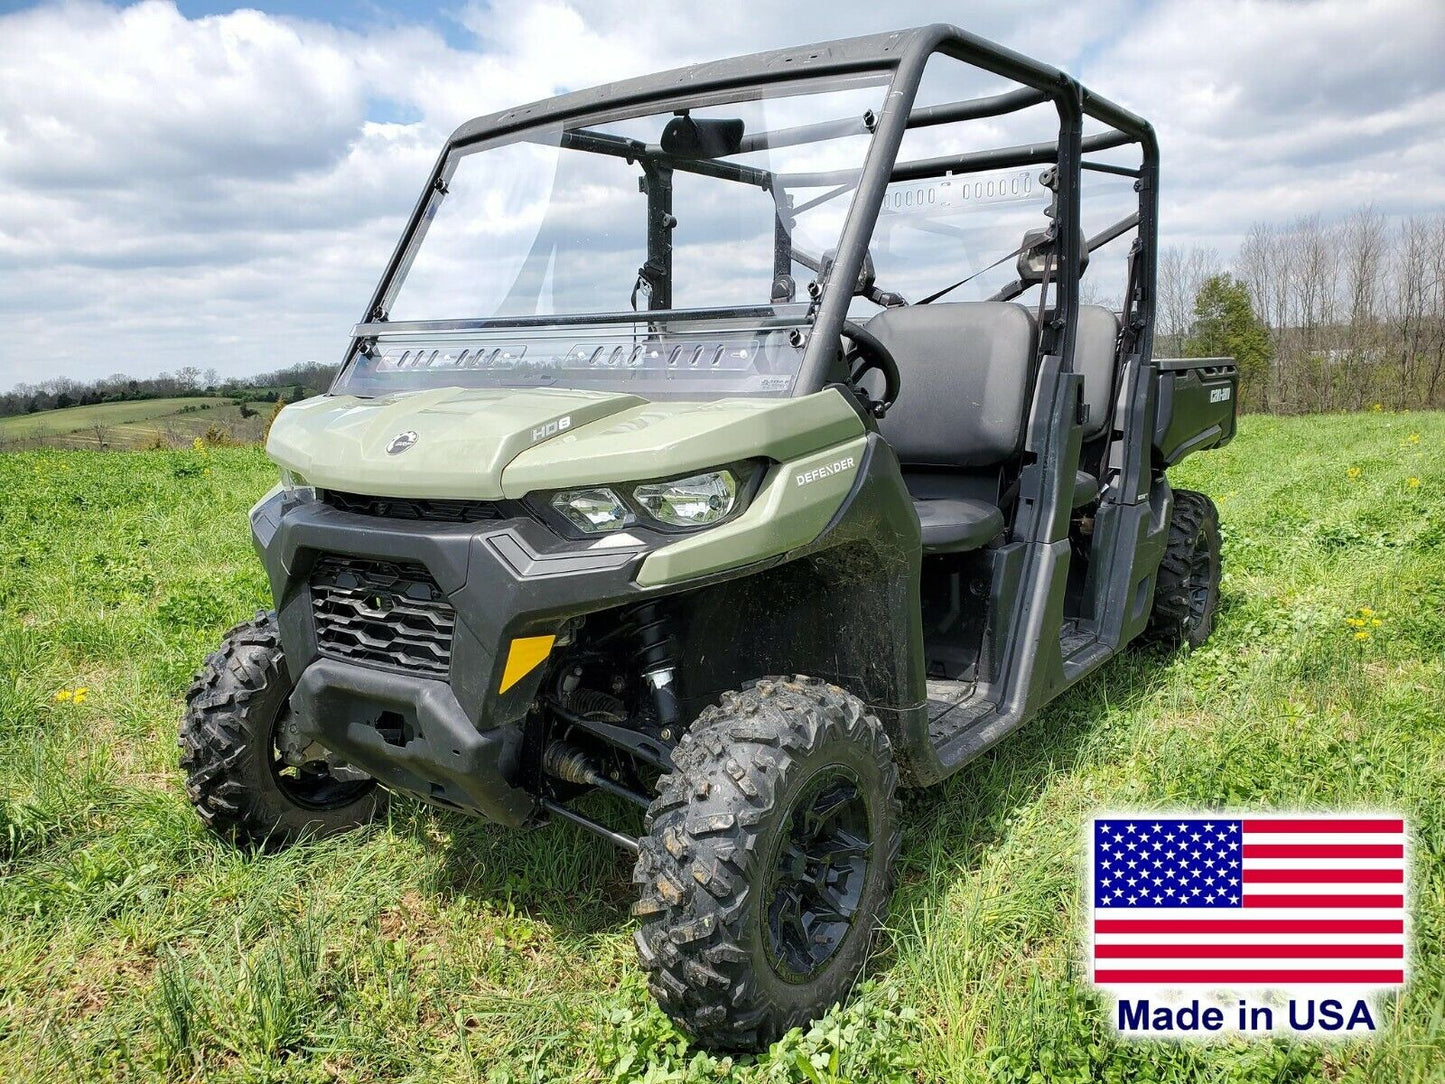 HARD WINDSHIELD for Can Am Defender Max - Travels Highway Speeds - Polycarbonate